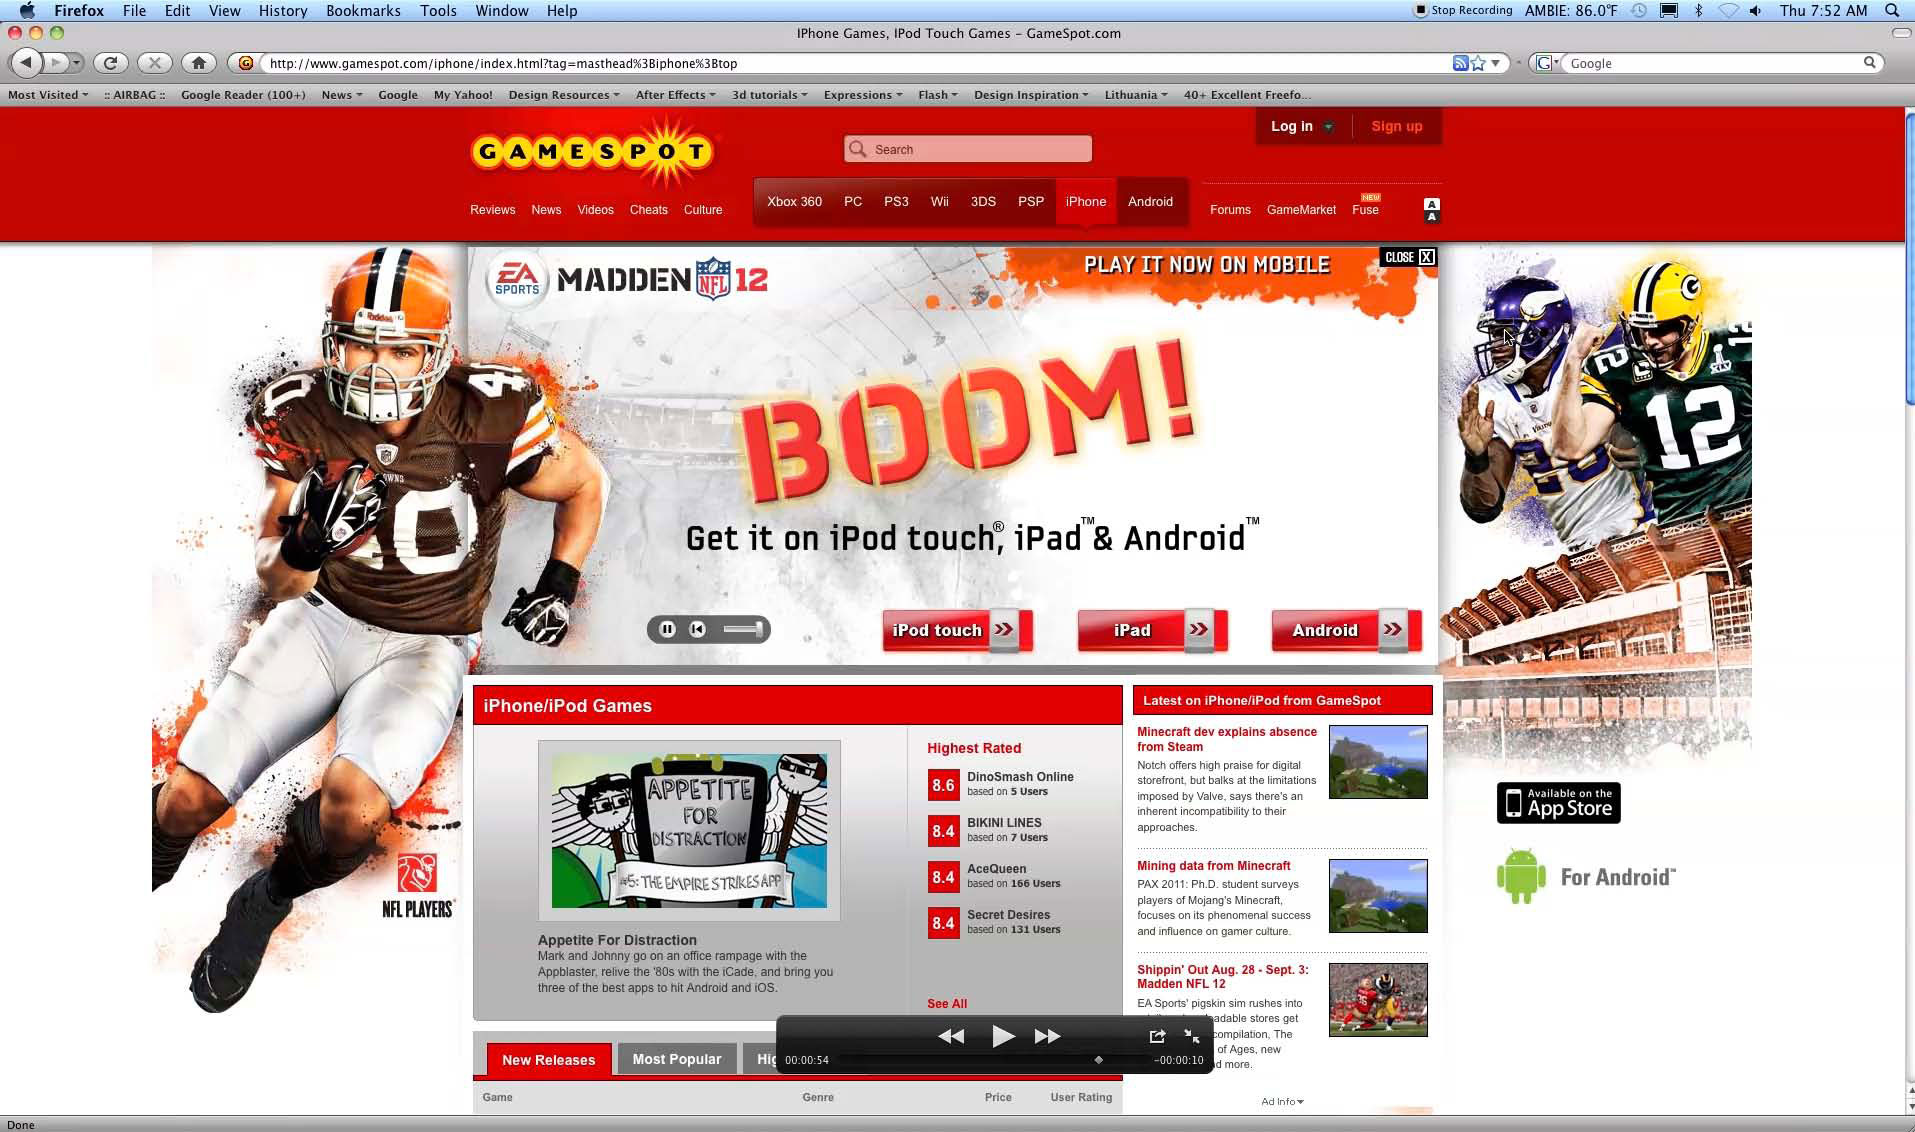 Website to promote the release of Madden2012 for Electronic Arts